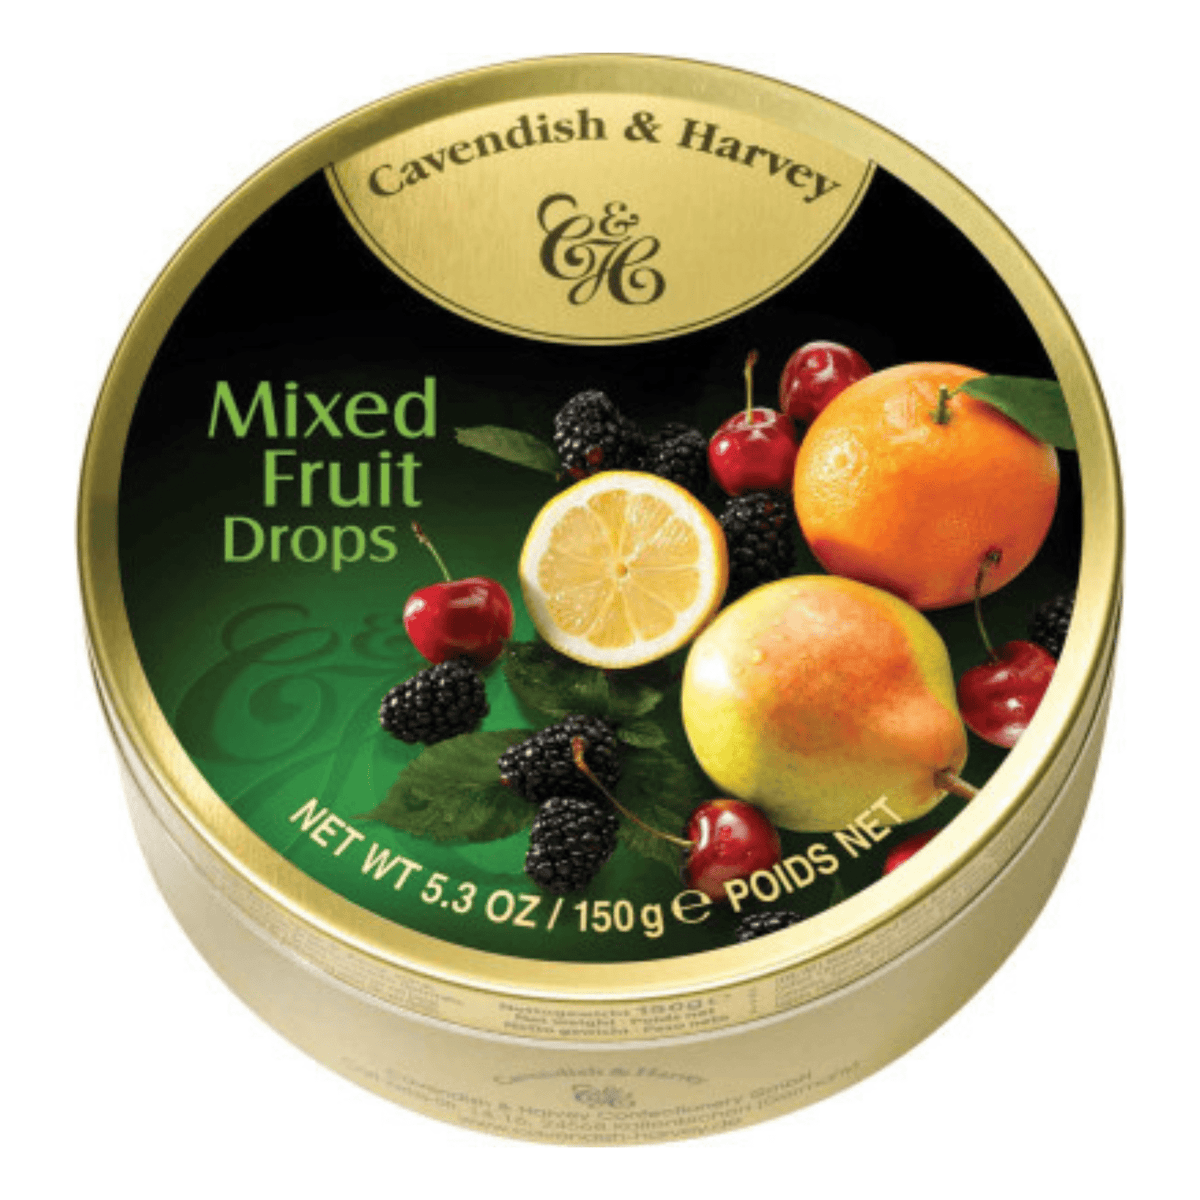 Primary Image of Mixed Fruit Drops Tin